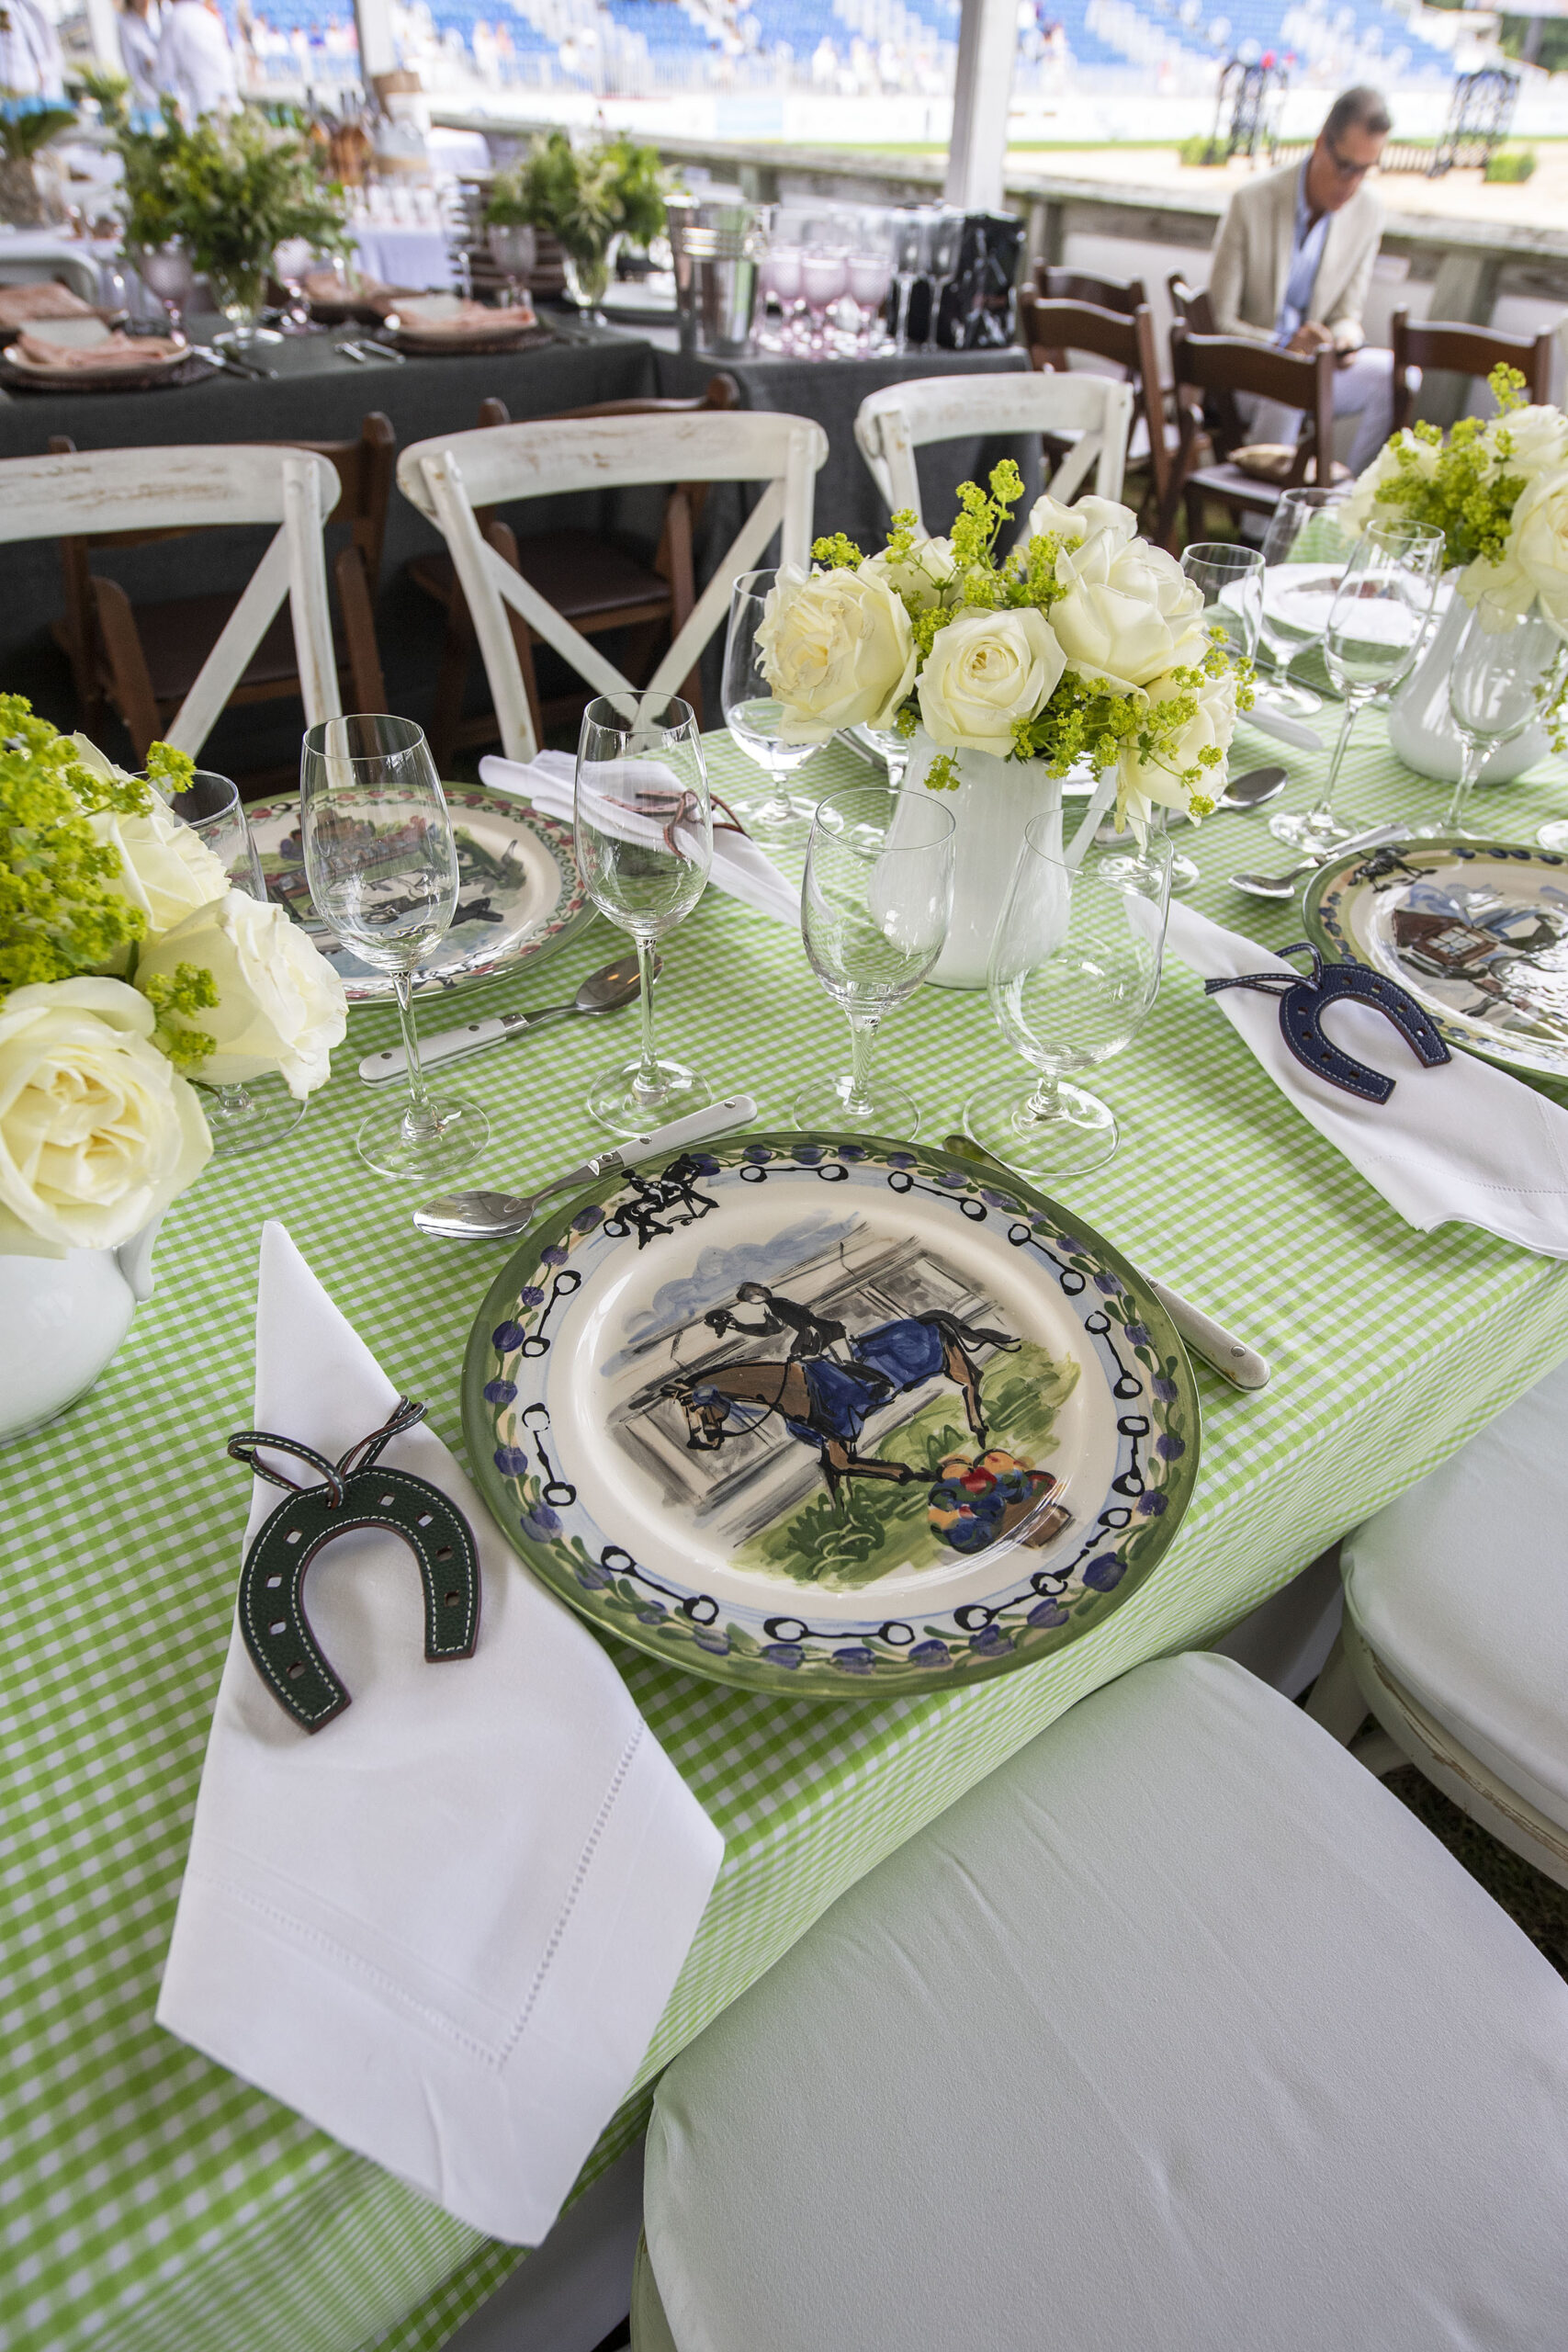 The table setting for Mane 'n' Tail in the VIP tent at the 2021 Hampton Classic on Grand Prix Sunday, September 5th, 2021